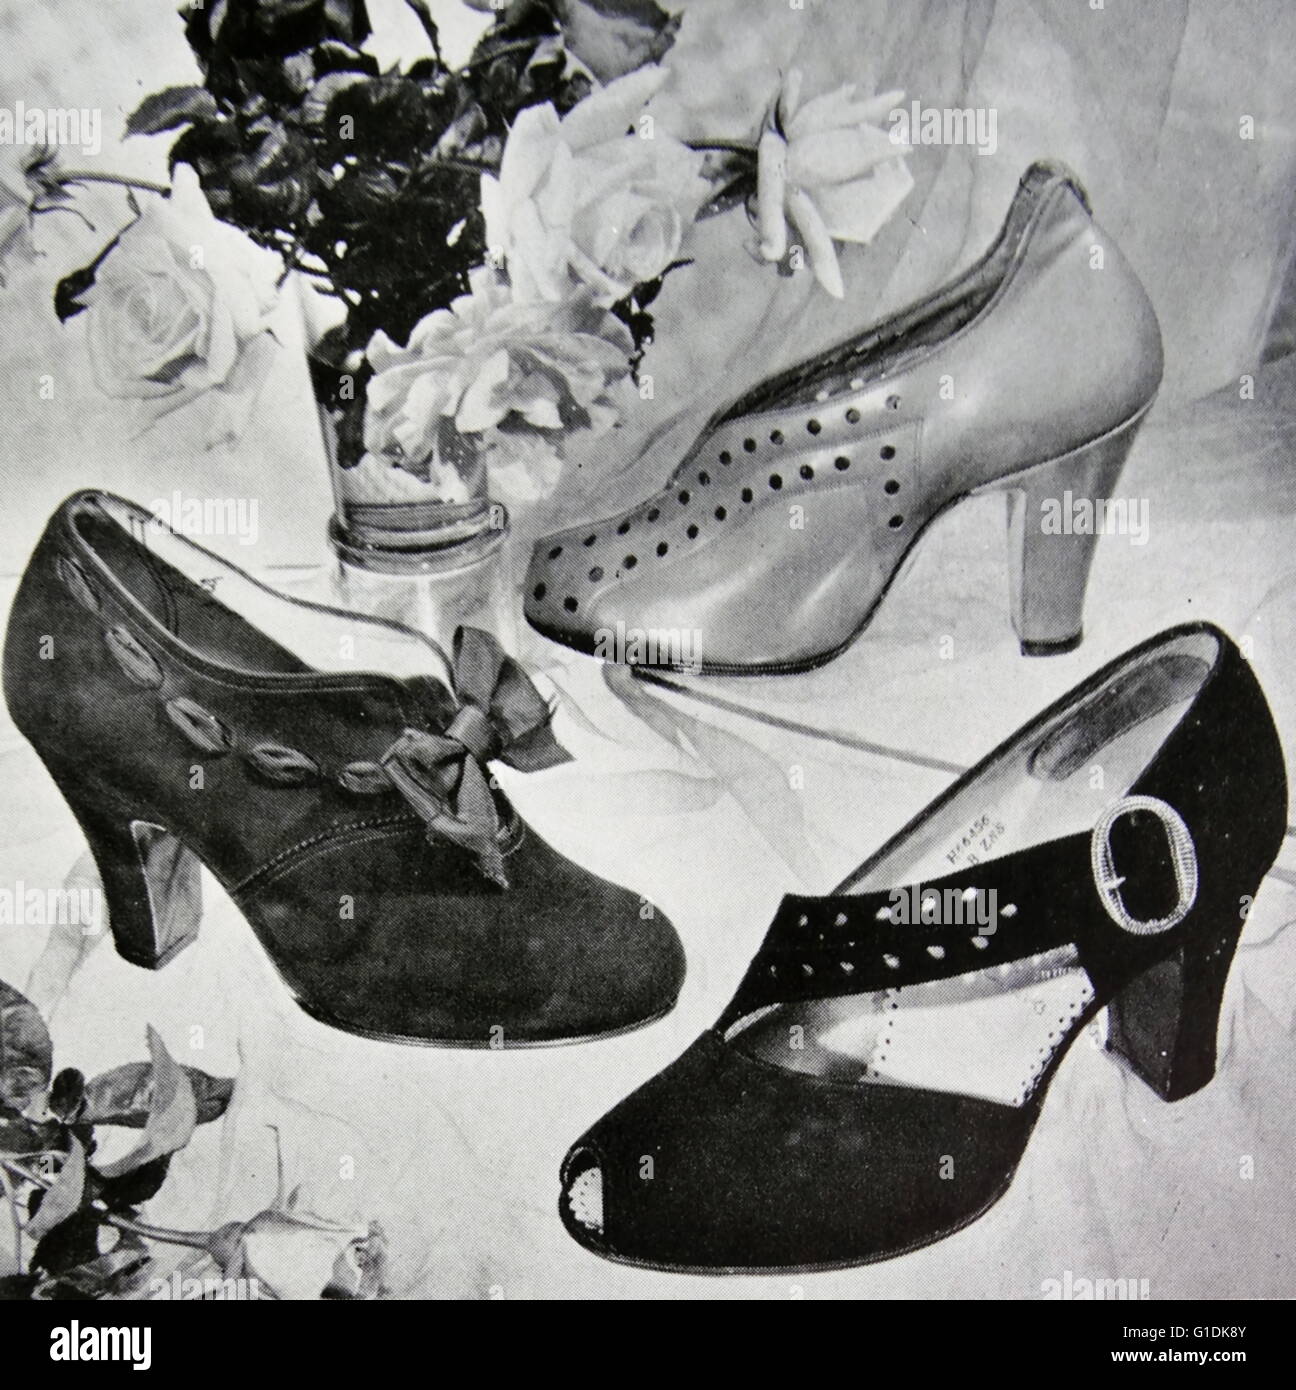 Advert for new elegant shoes by Rayne, a British manufacturer known for high-end and couture shoes. Founded in 1899 as a theatrical costumier, it diversified into fashion shoes in the 1920s. Stock Photo